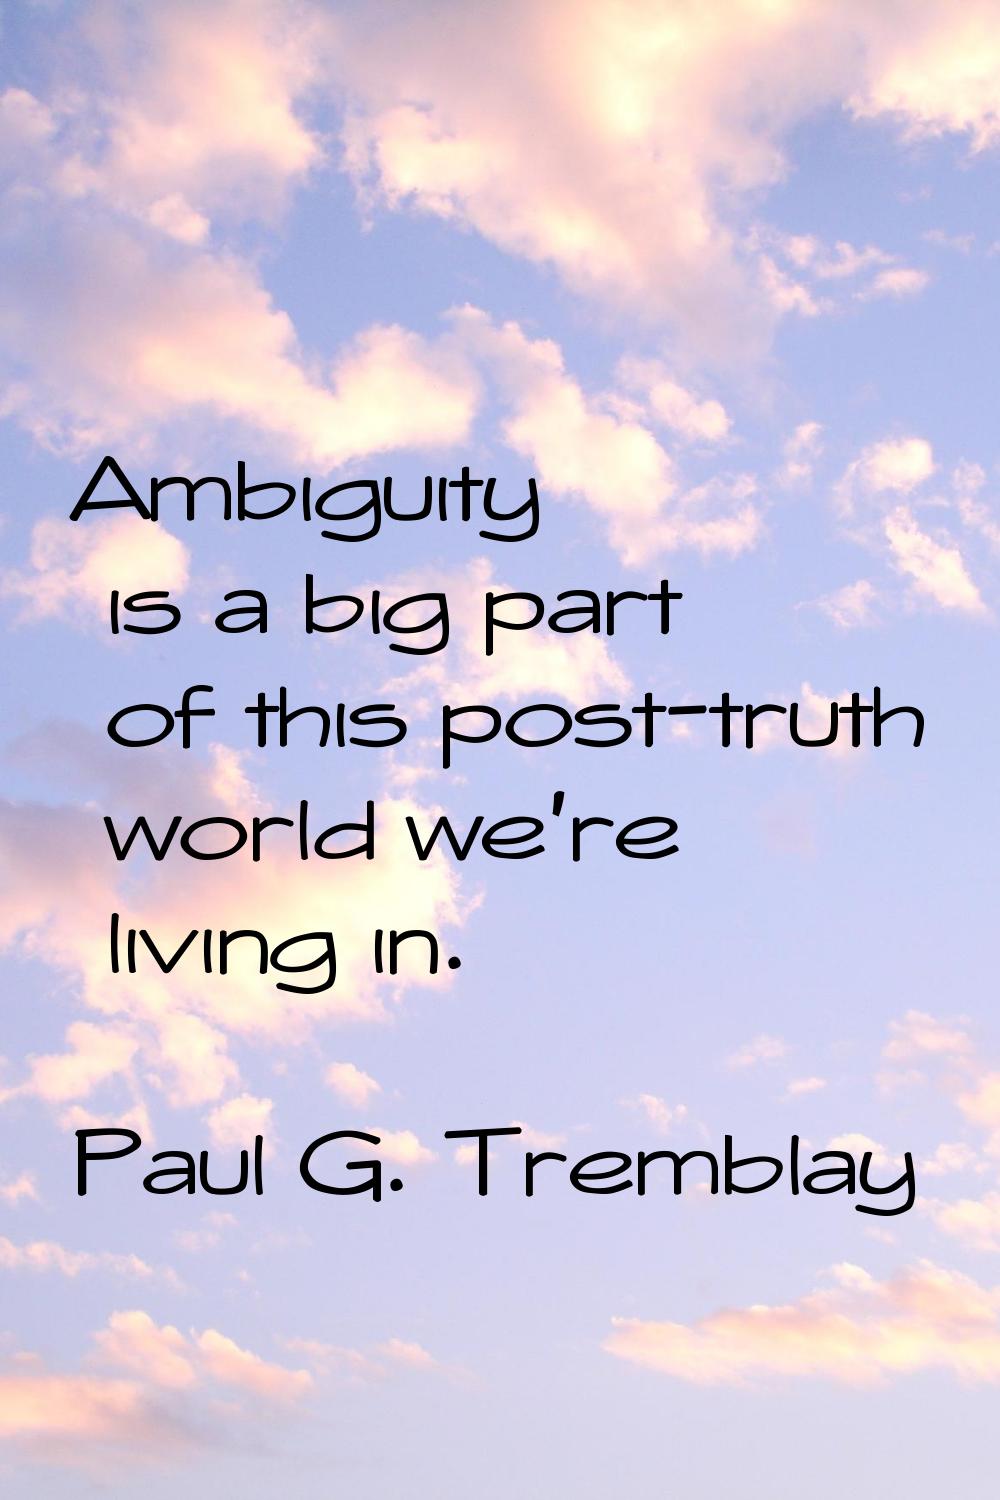 Ambiguity is a big part of this post-truth world we're living in.